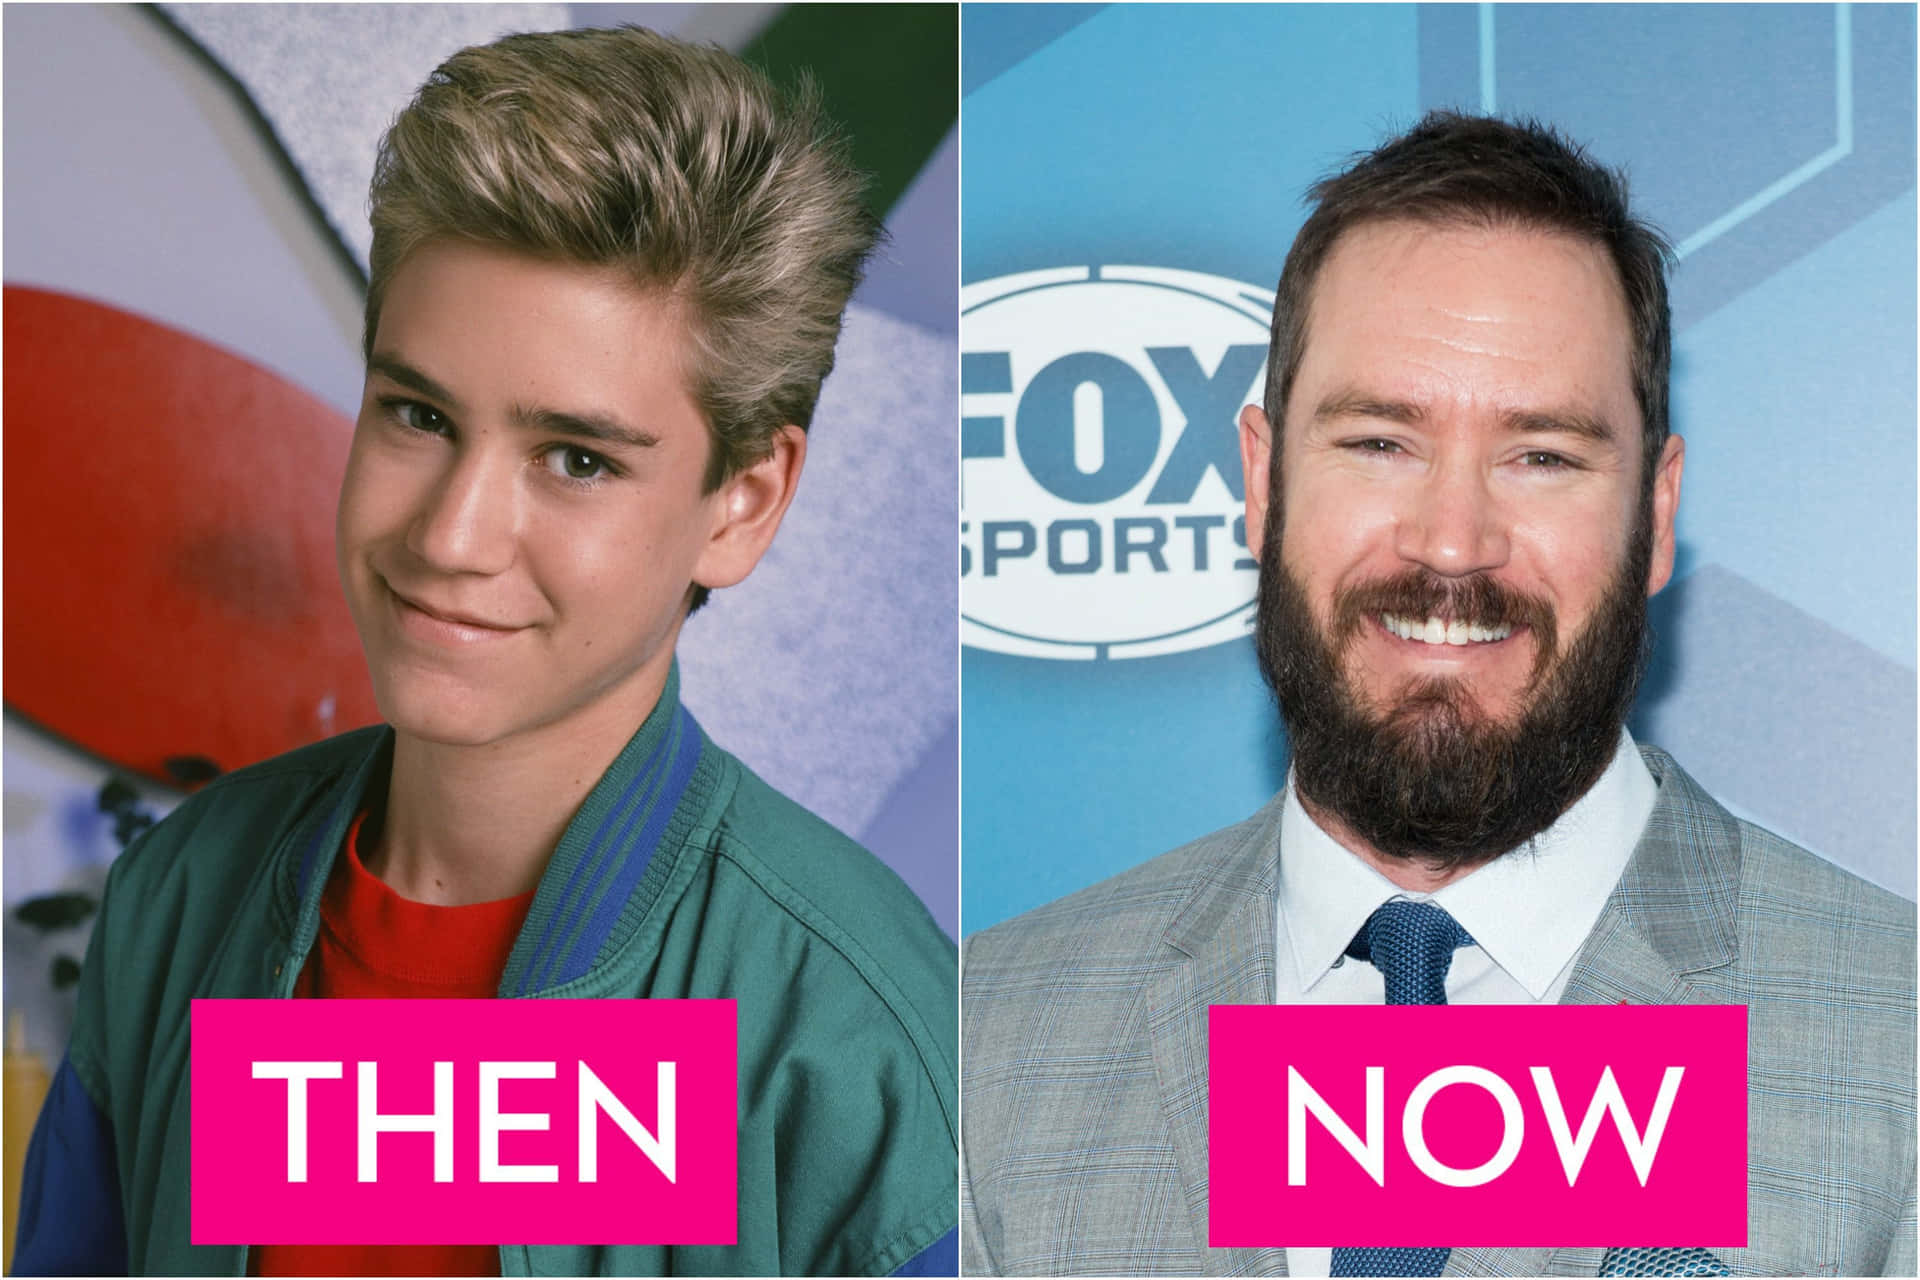 Markpaul Gosselaar Is An American Actor, Known For His Roles In Television Shows Like 